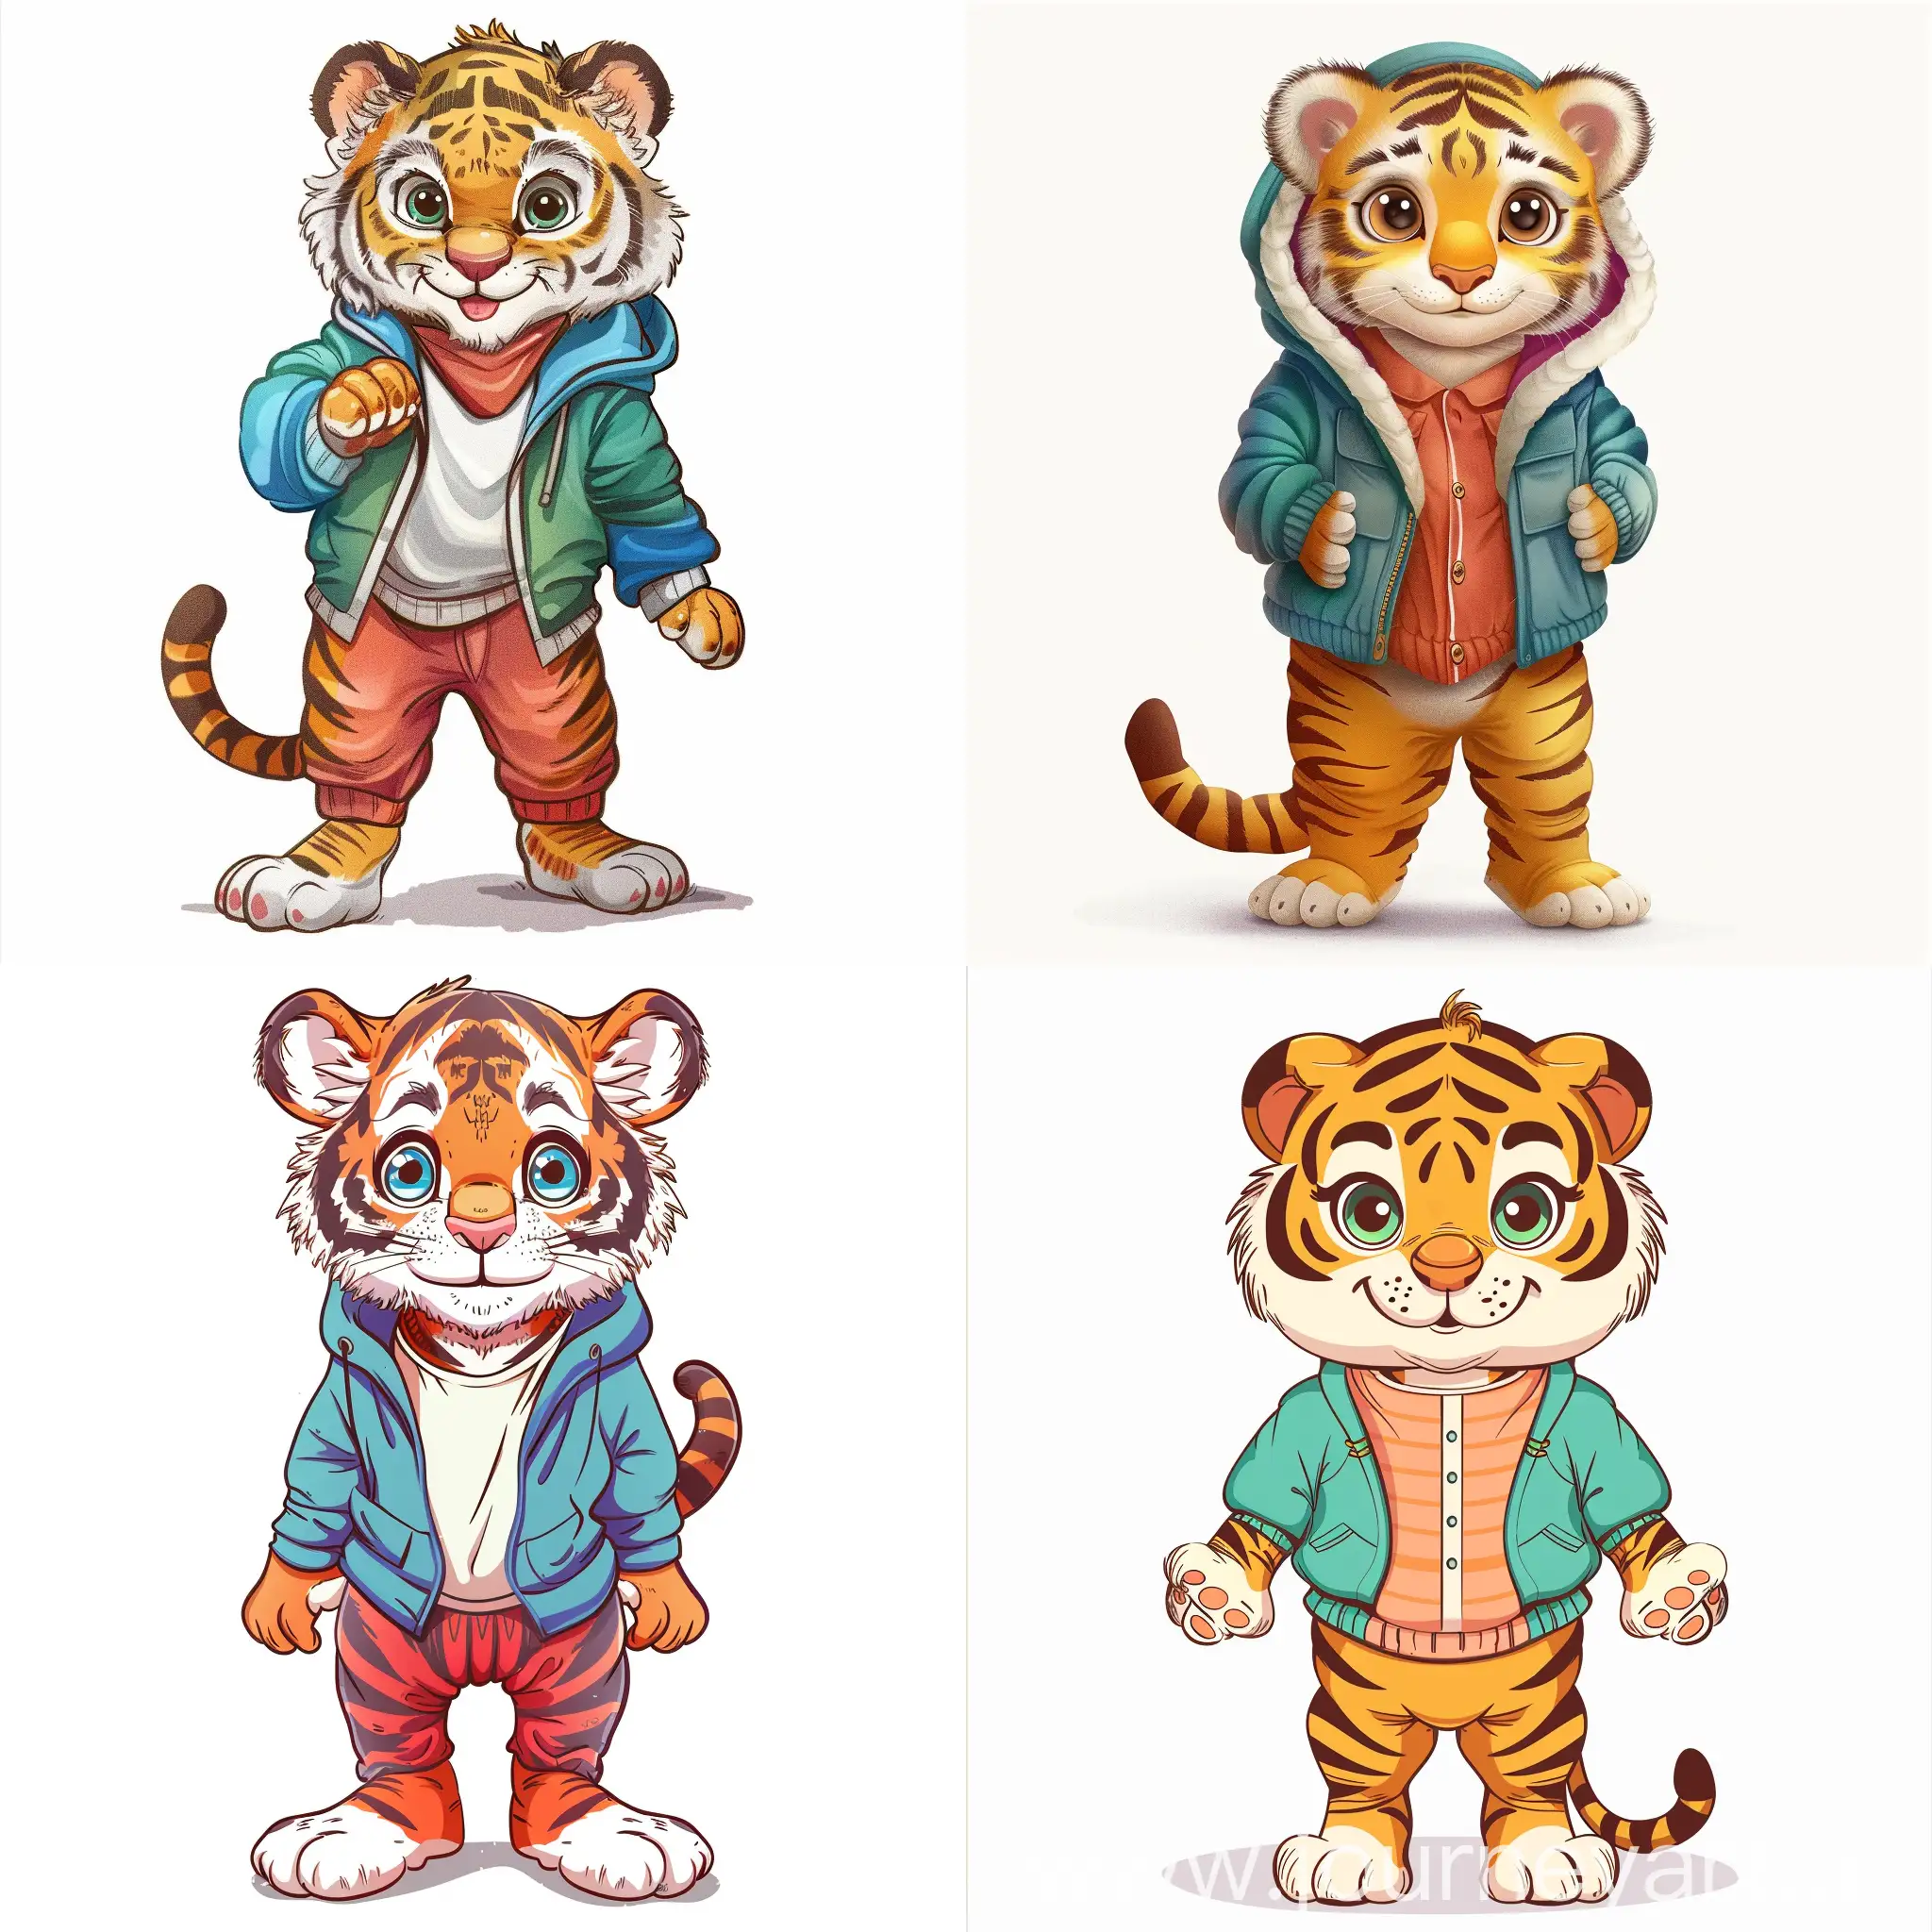 Adorable-Anthropomorphic-Baby-Tiger-in-Colorful-Attire